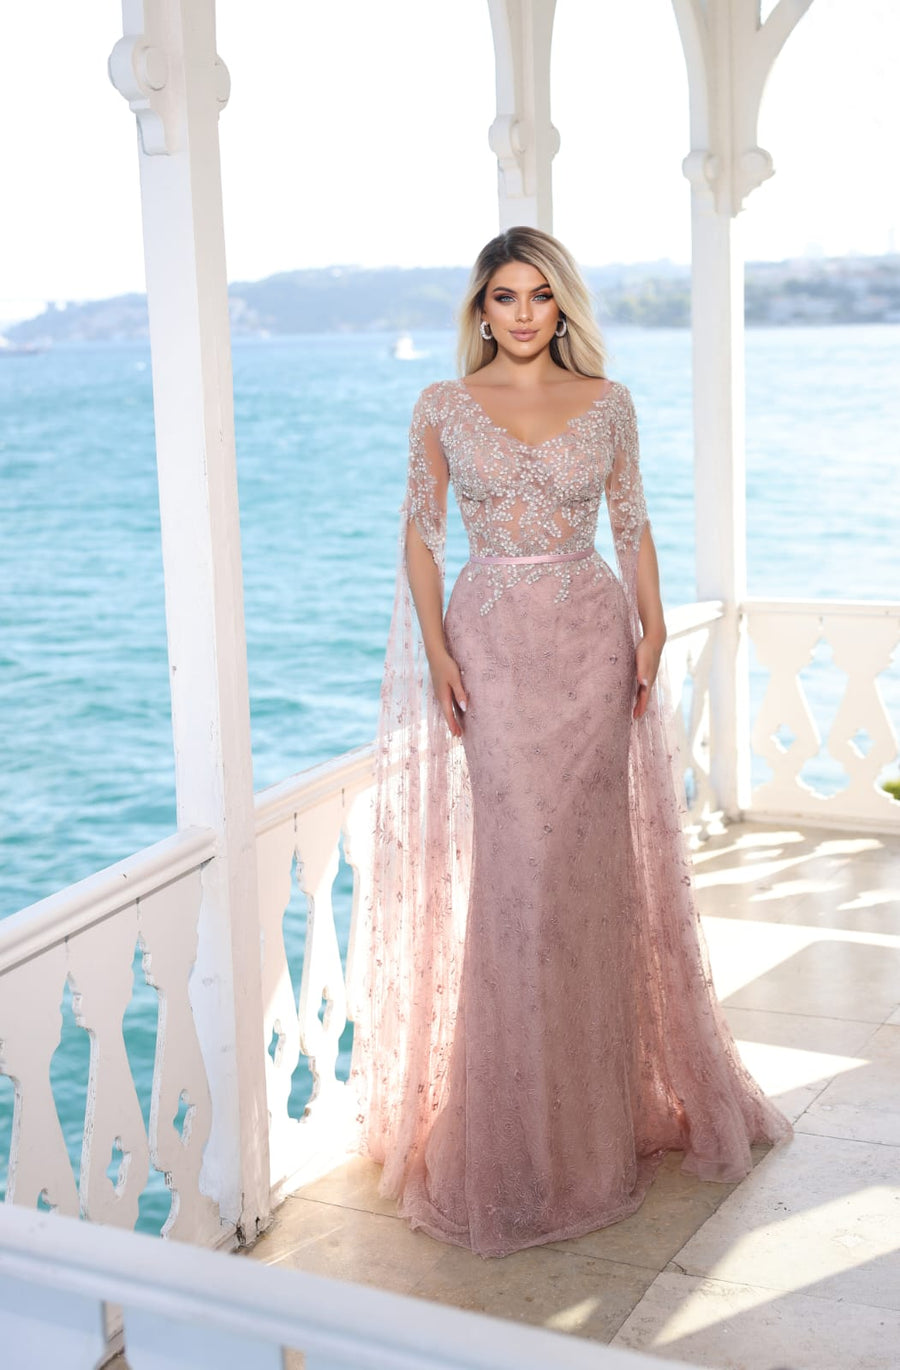 MODESSA BEADED LACE GOWN WITH LONG LACE SLEEVE FEATURE